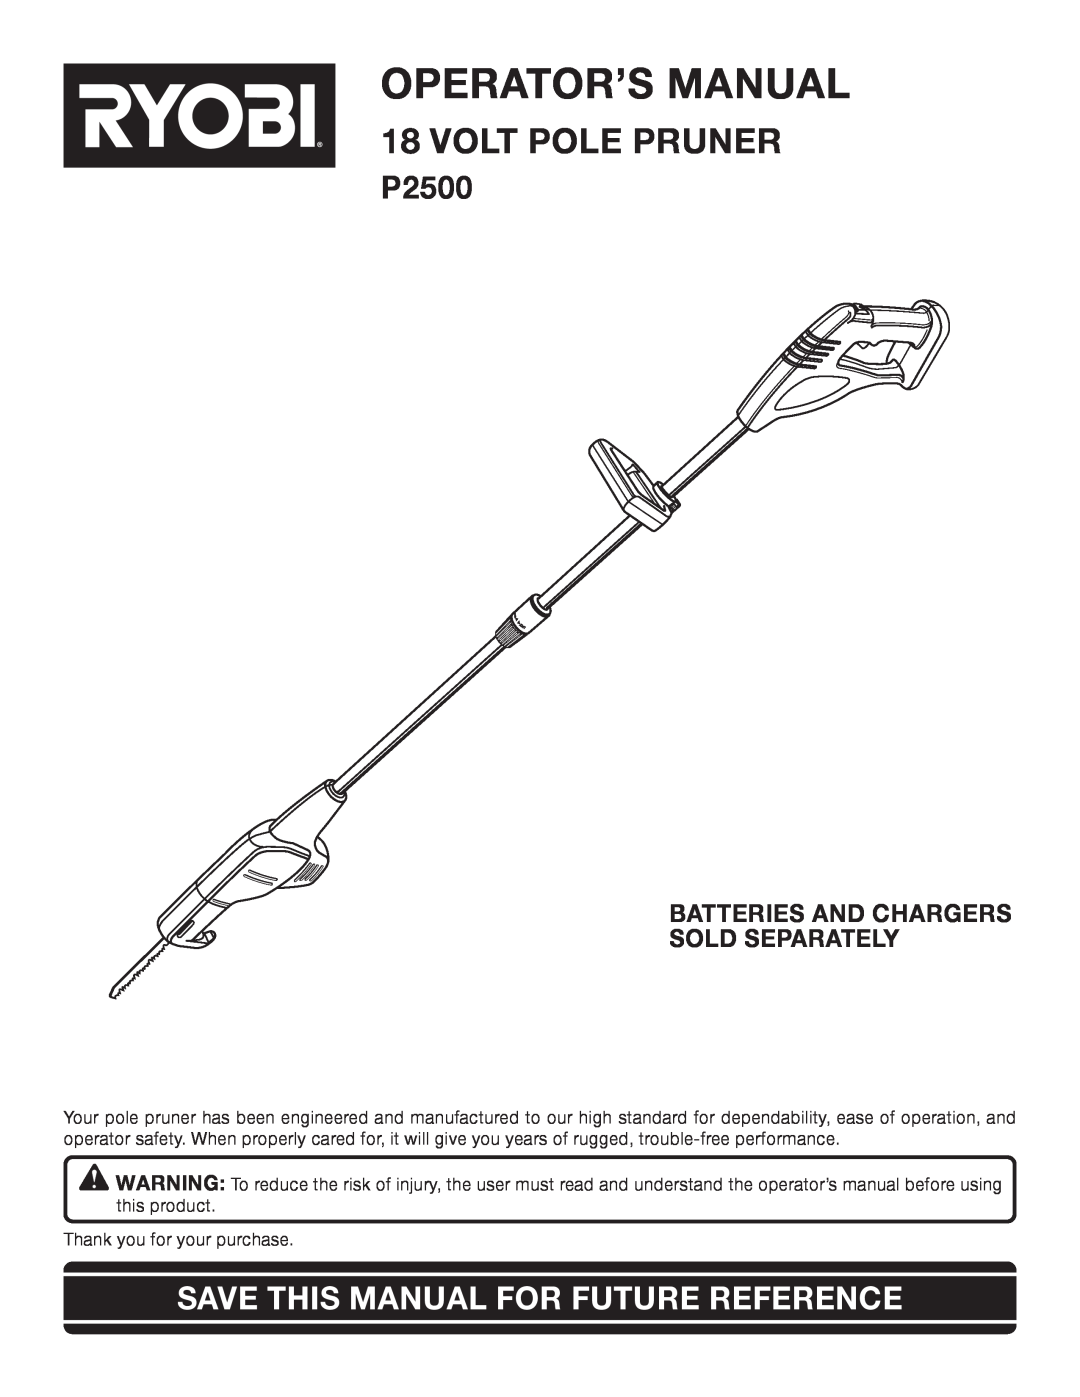 Ryobi P2500 manual Operator’S Manual, Volt Pole Pruner, Save This Manual For Future Reference 